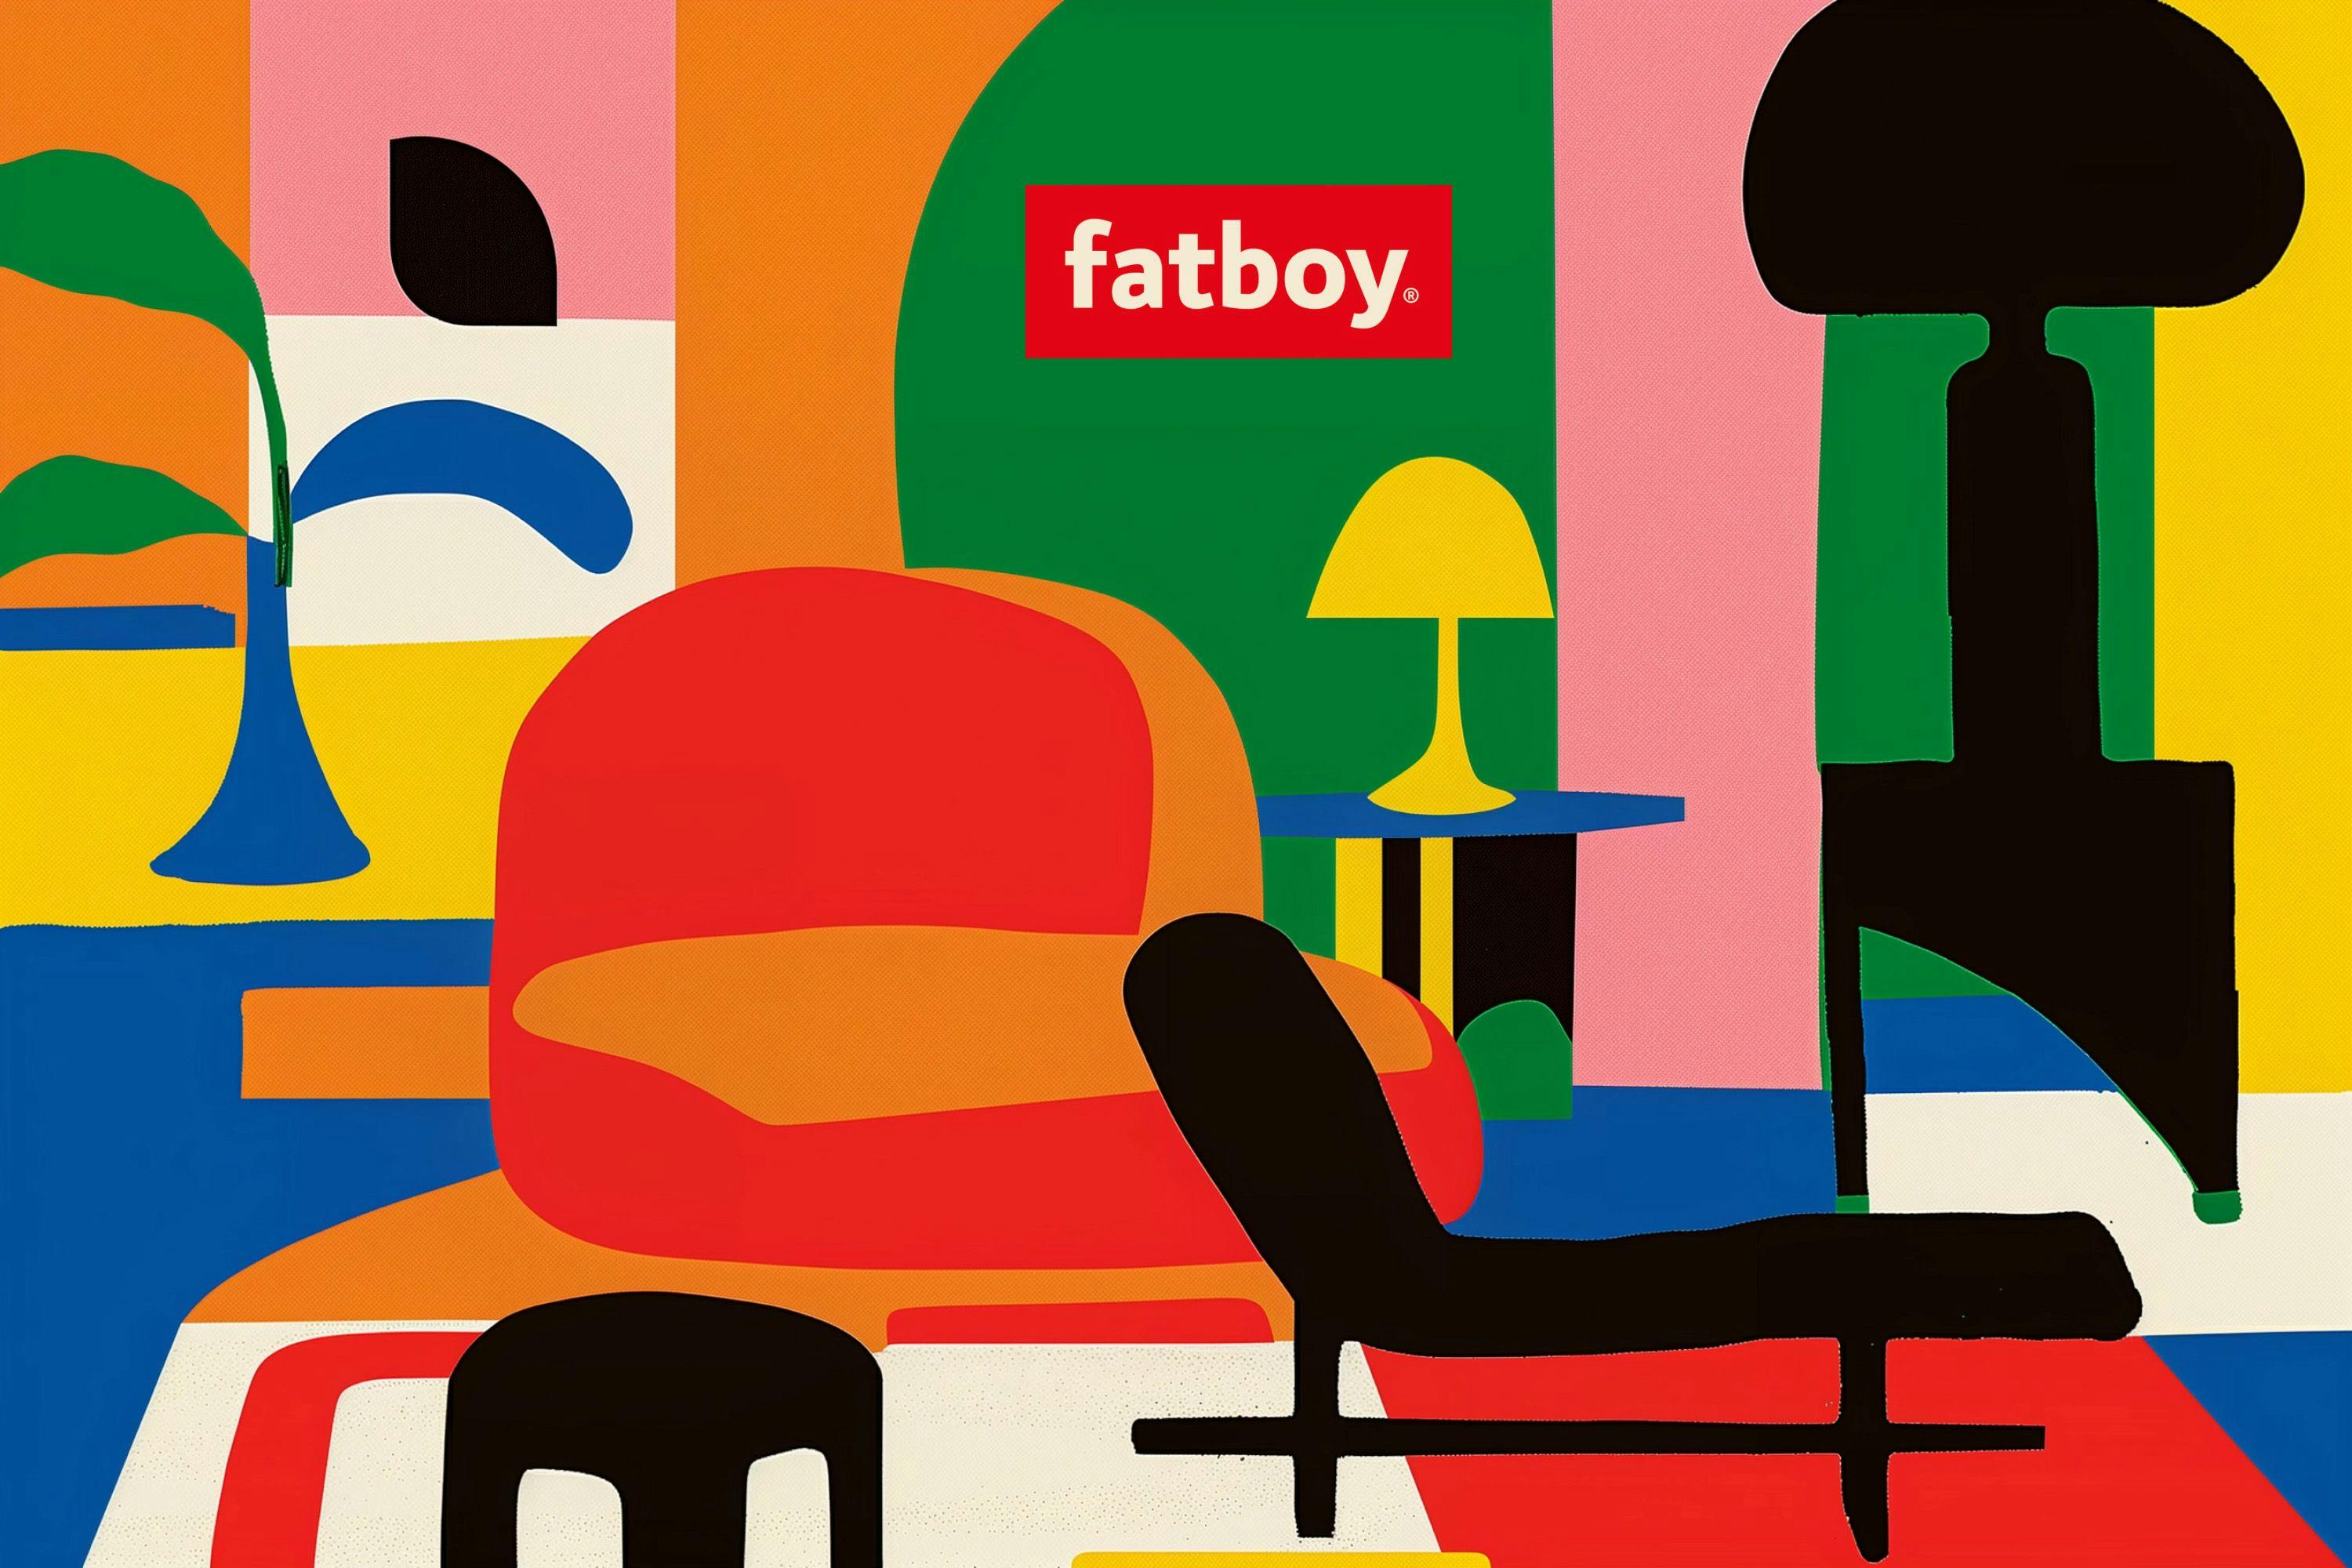 Artistic image of furniture with the Fatboy logo